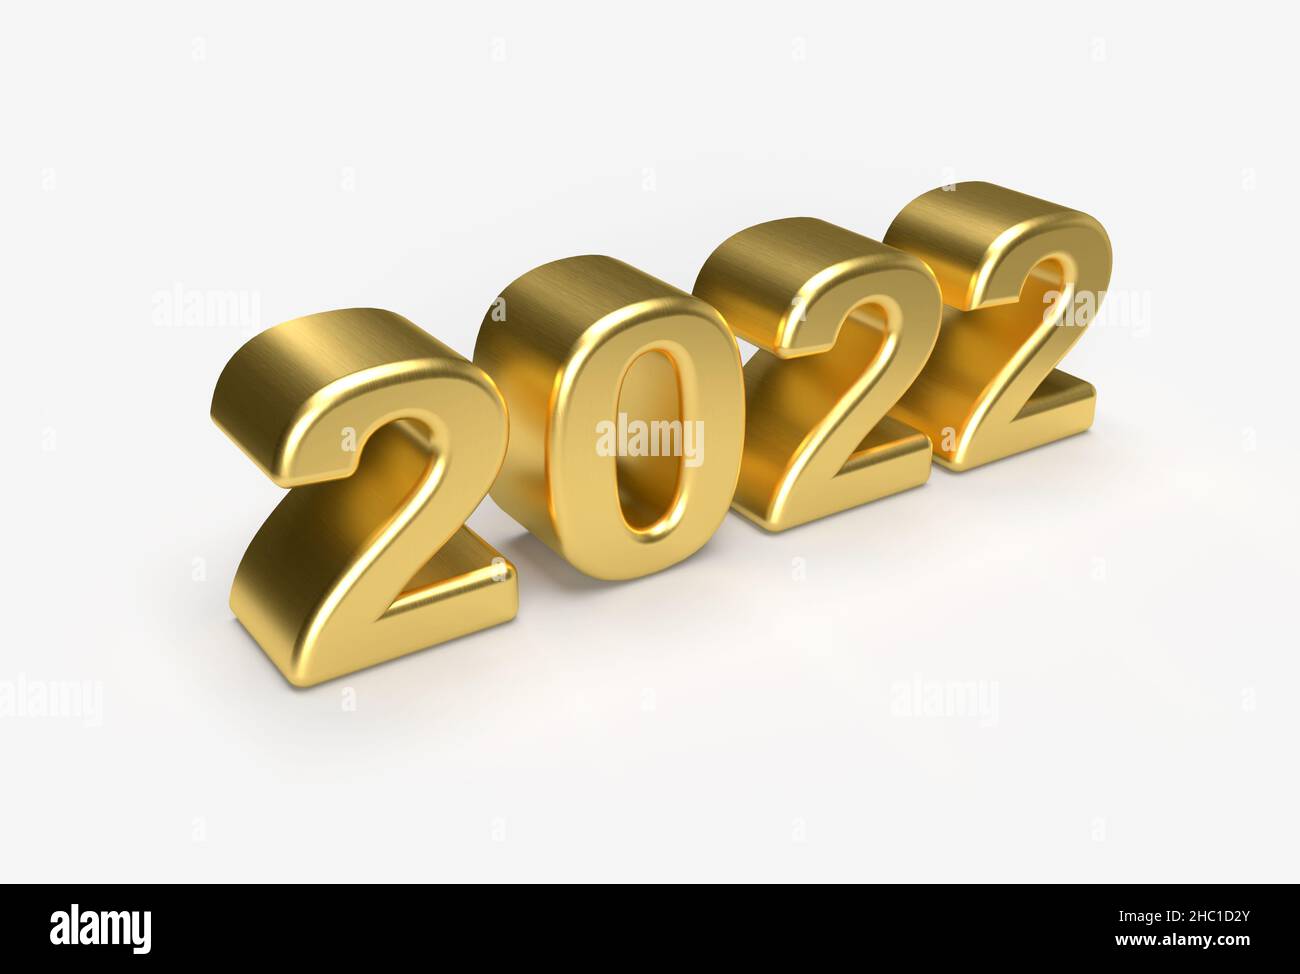 Metalic Gold 2022 new year 3d render illustration isolated on white background, Perspective View. Stock Photo